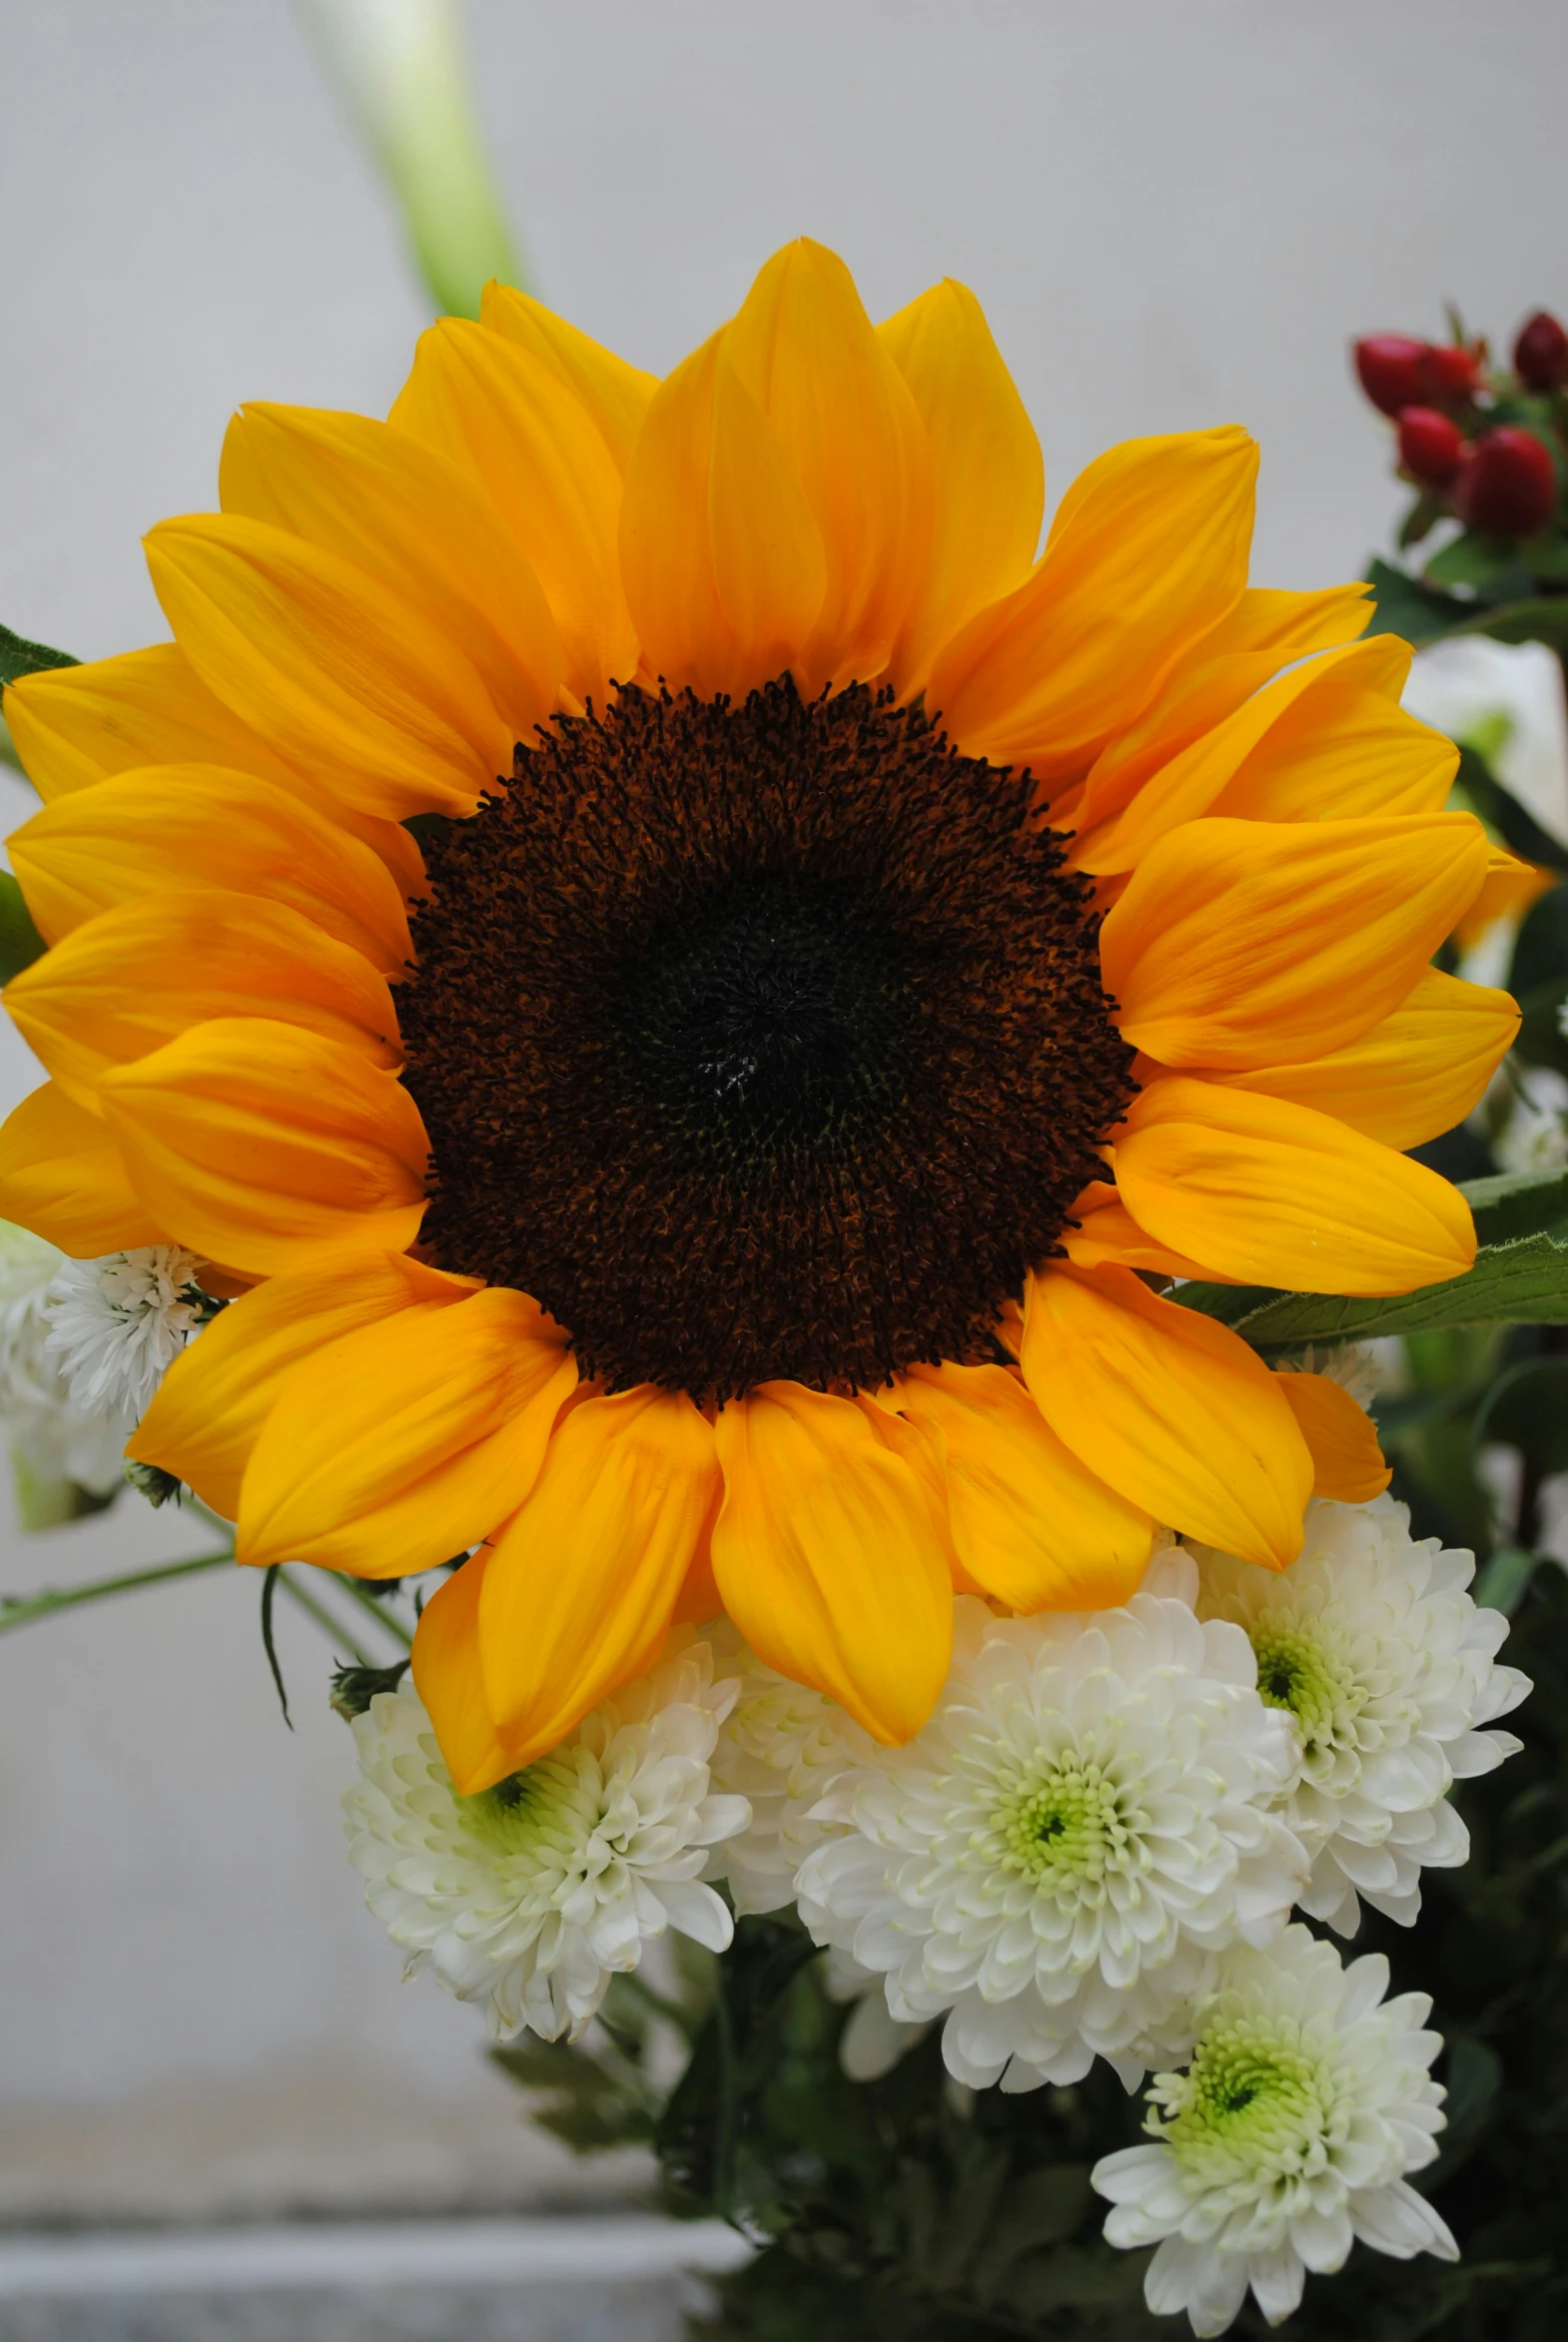 a sunflower is displayed in a vase filled with flowers